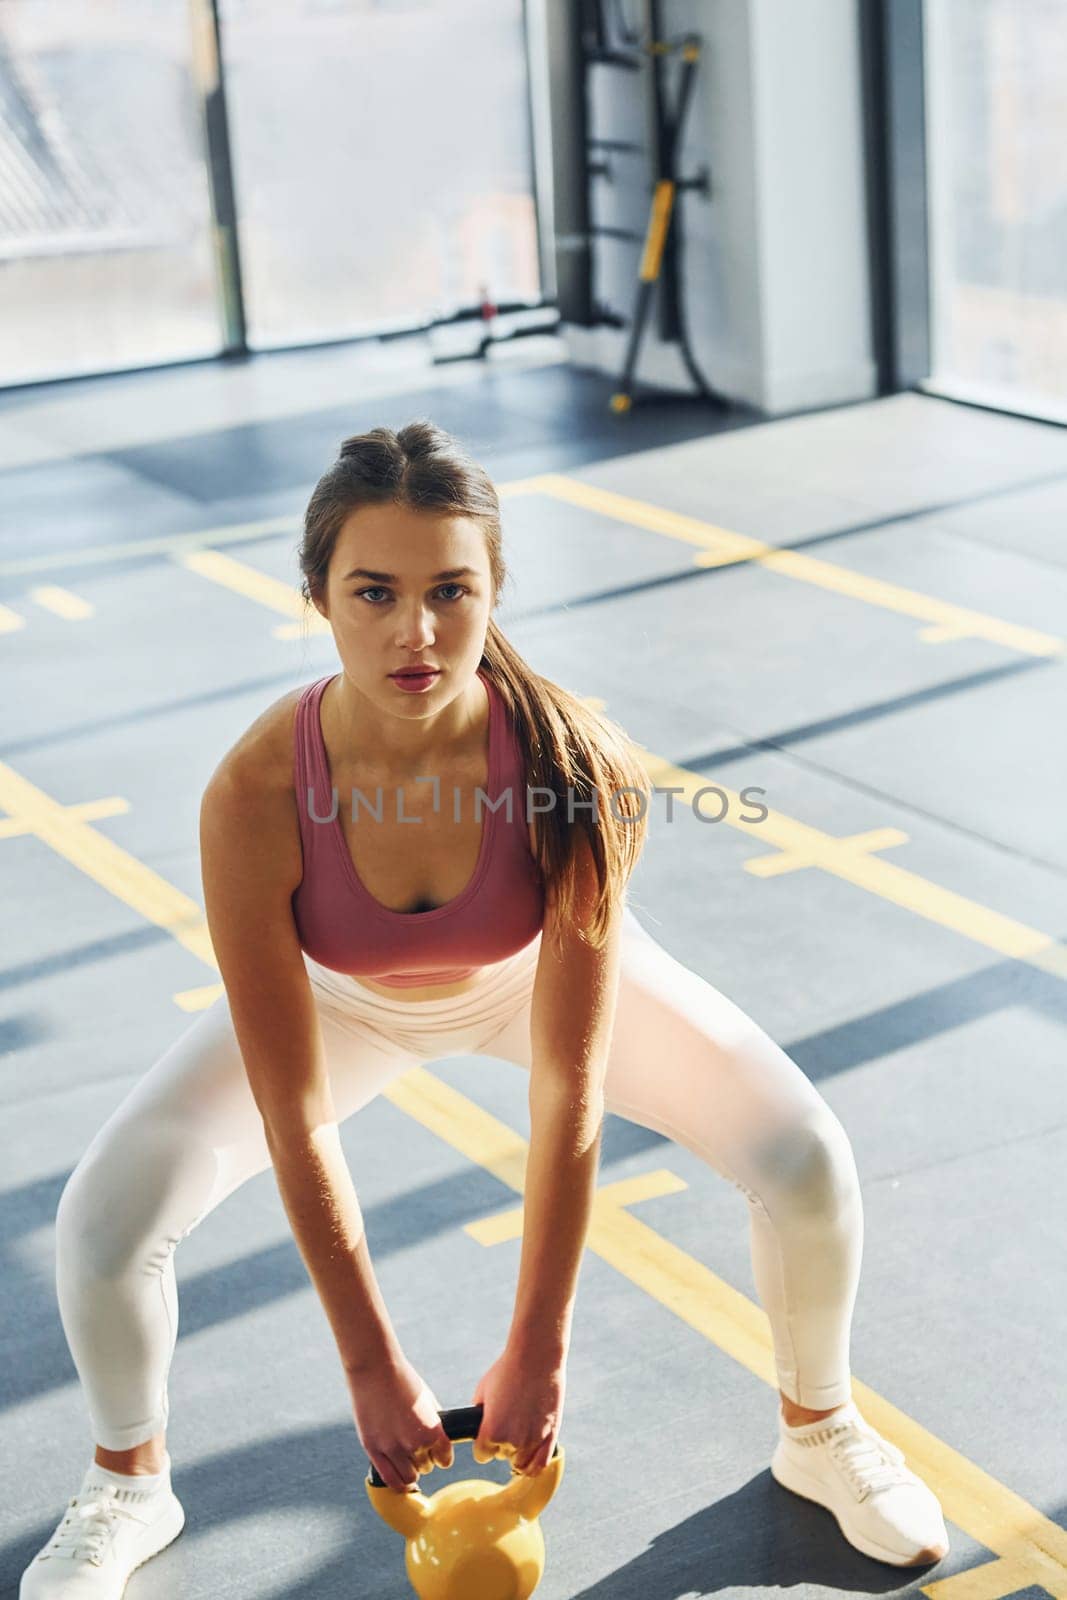 In the gym. Beautiful young woman with slim body type.